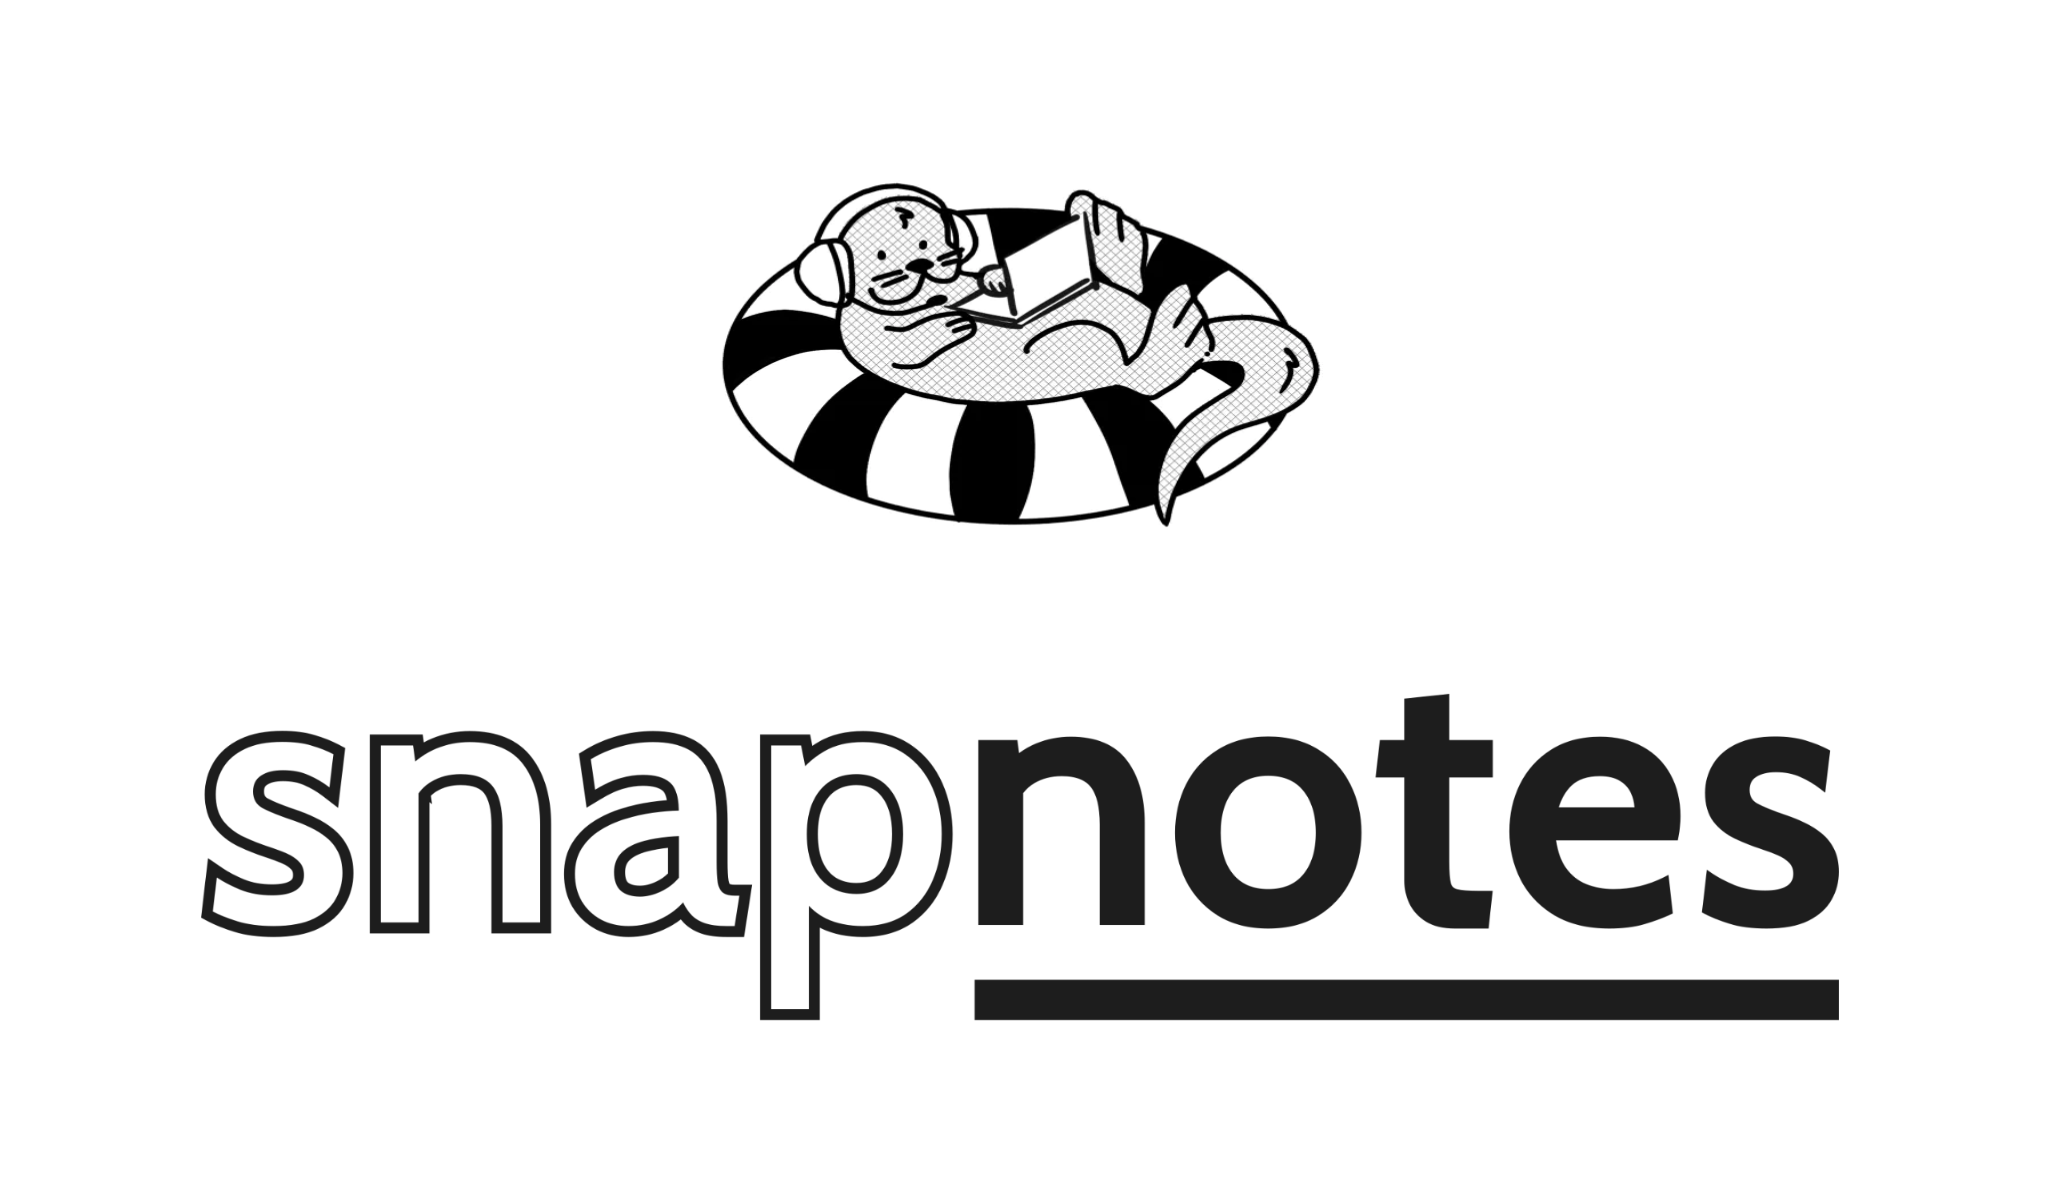 Screenshot of Snapnotes logo with an otter in an inflatable tube.